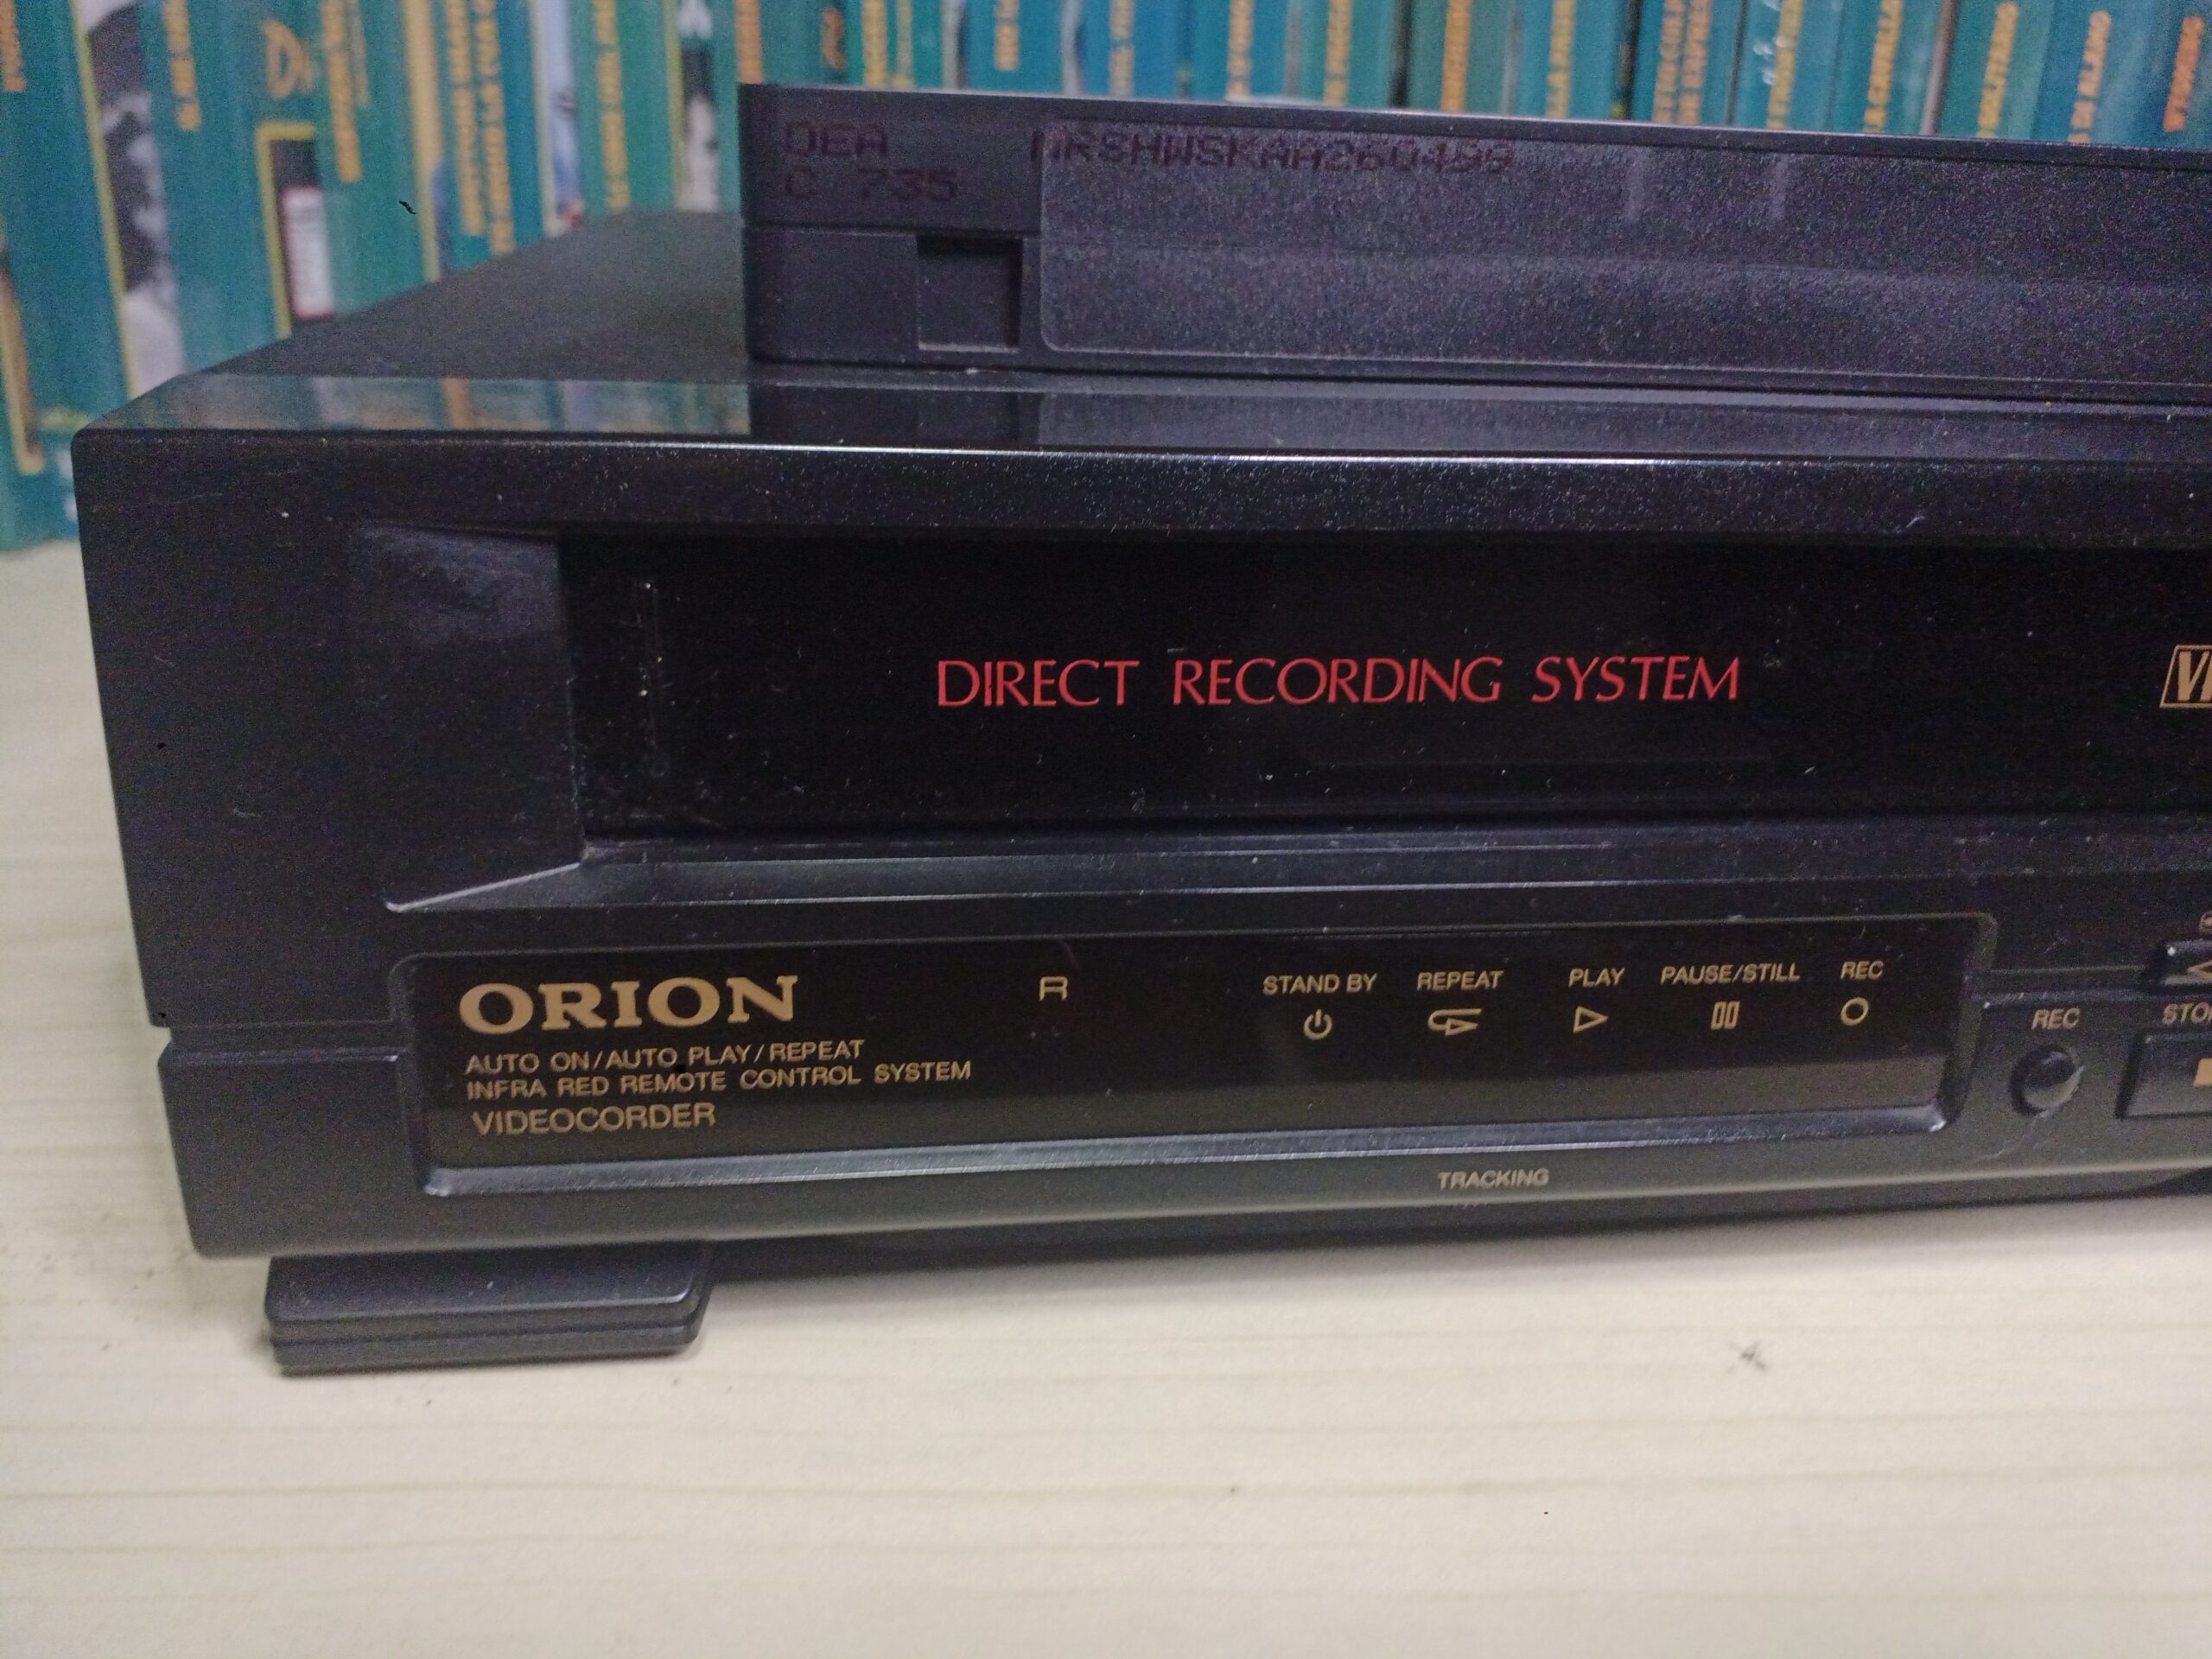 LETTORE VHS ORION VP-303R